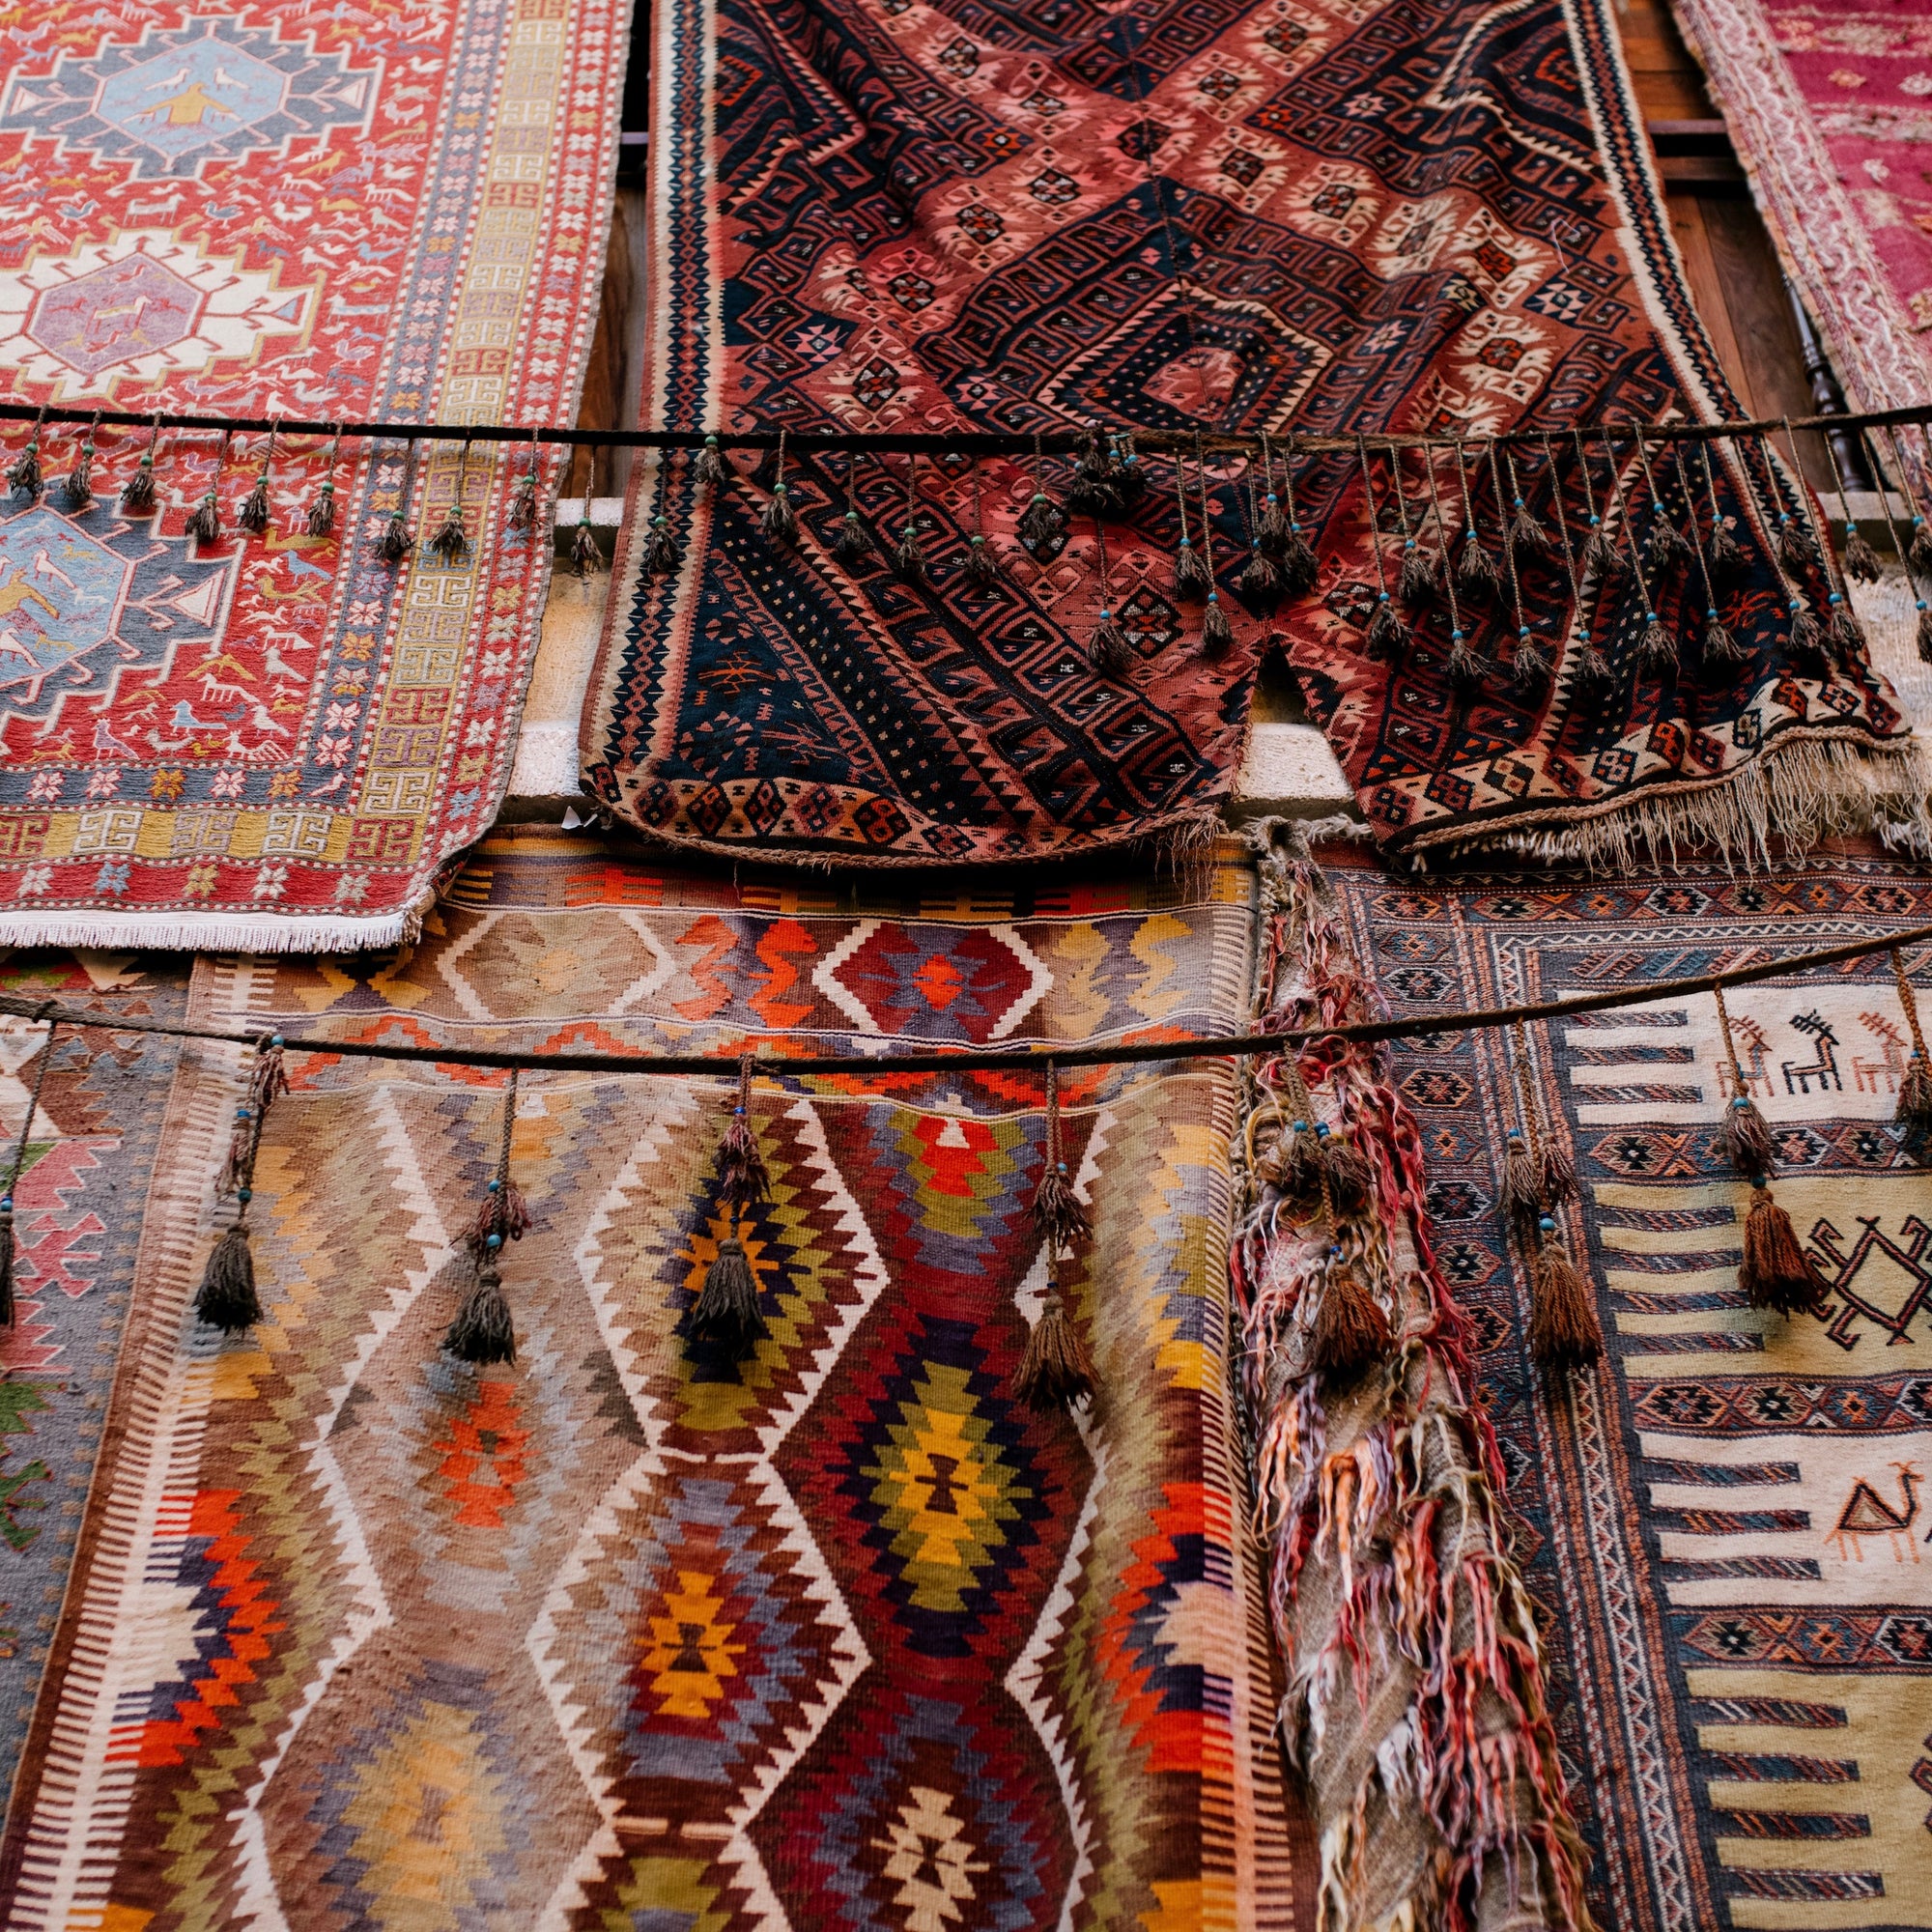 Vintage Turkish Rugs To add Warmth and Comfort To Your Home